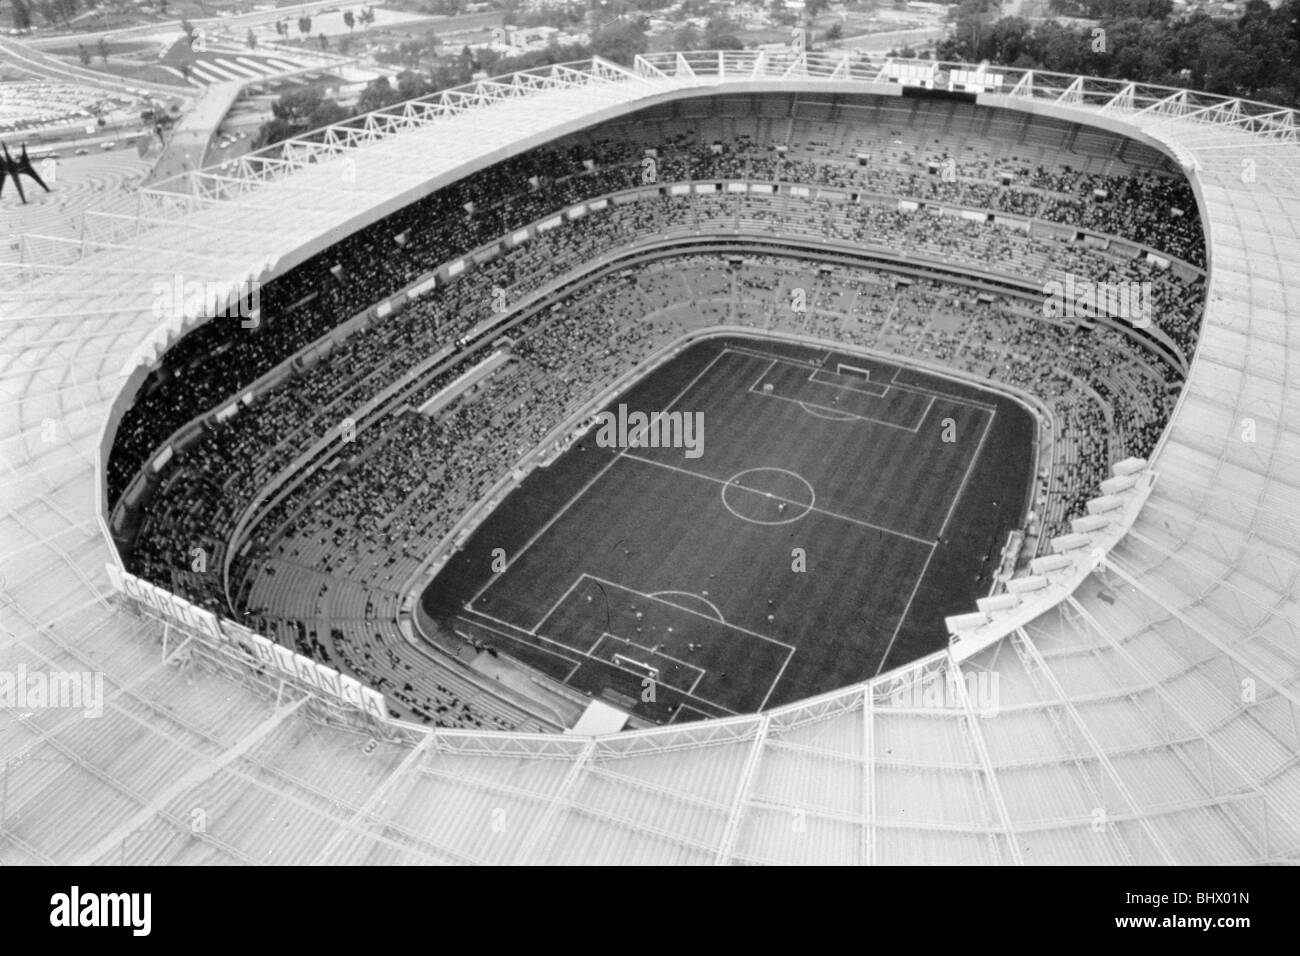 An Aerial view of the famous Azteca Stadium in Mexico which hosted the 1970 and 1986 World Cup Finals. Circa 1970. Stock Photo